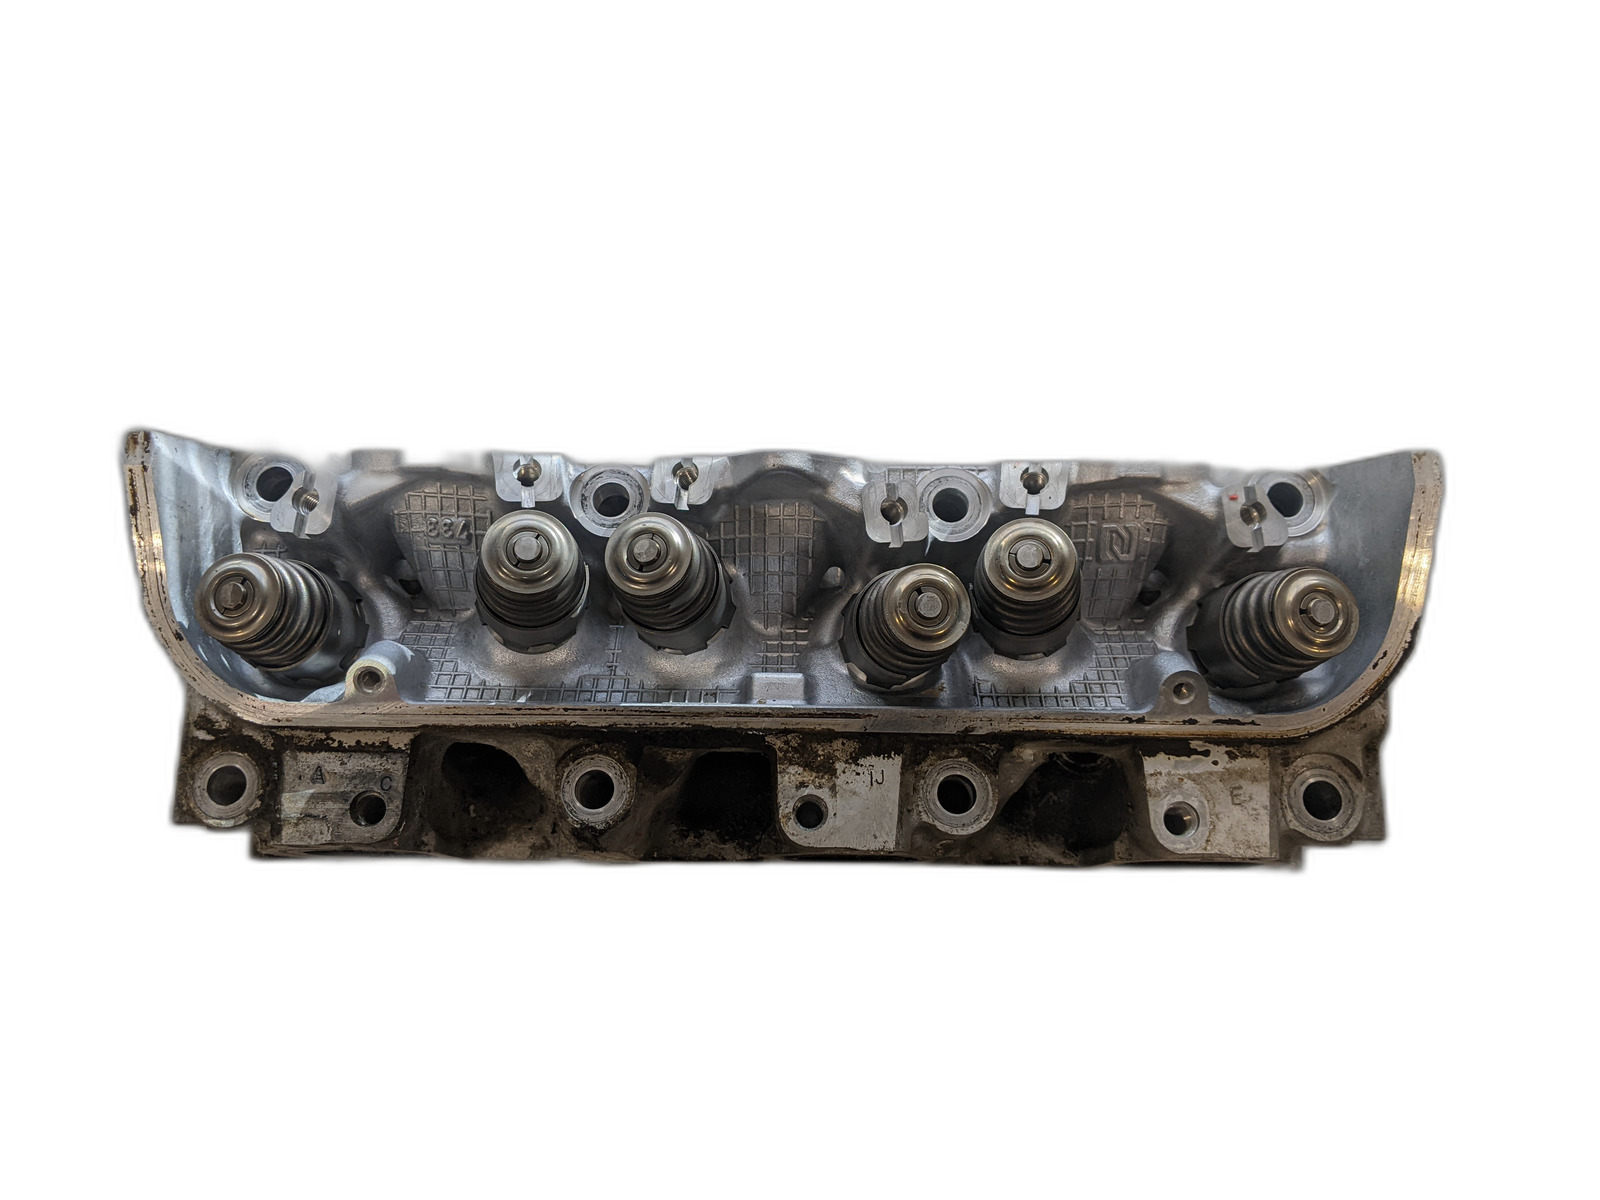 Left Cylinder Head From 2006 Chevrolet Impala  3.5 12590746 - $134.95